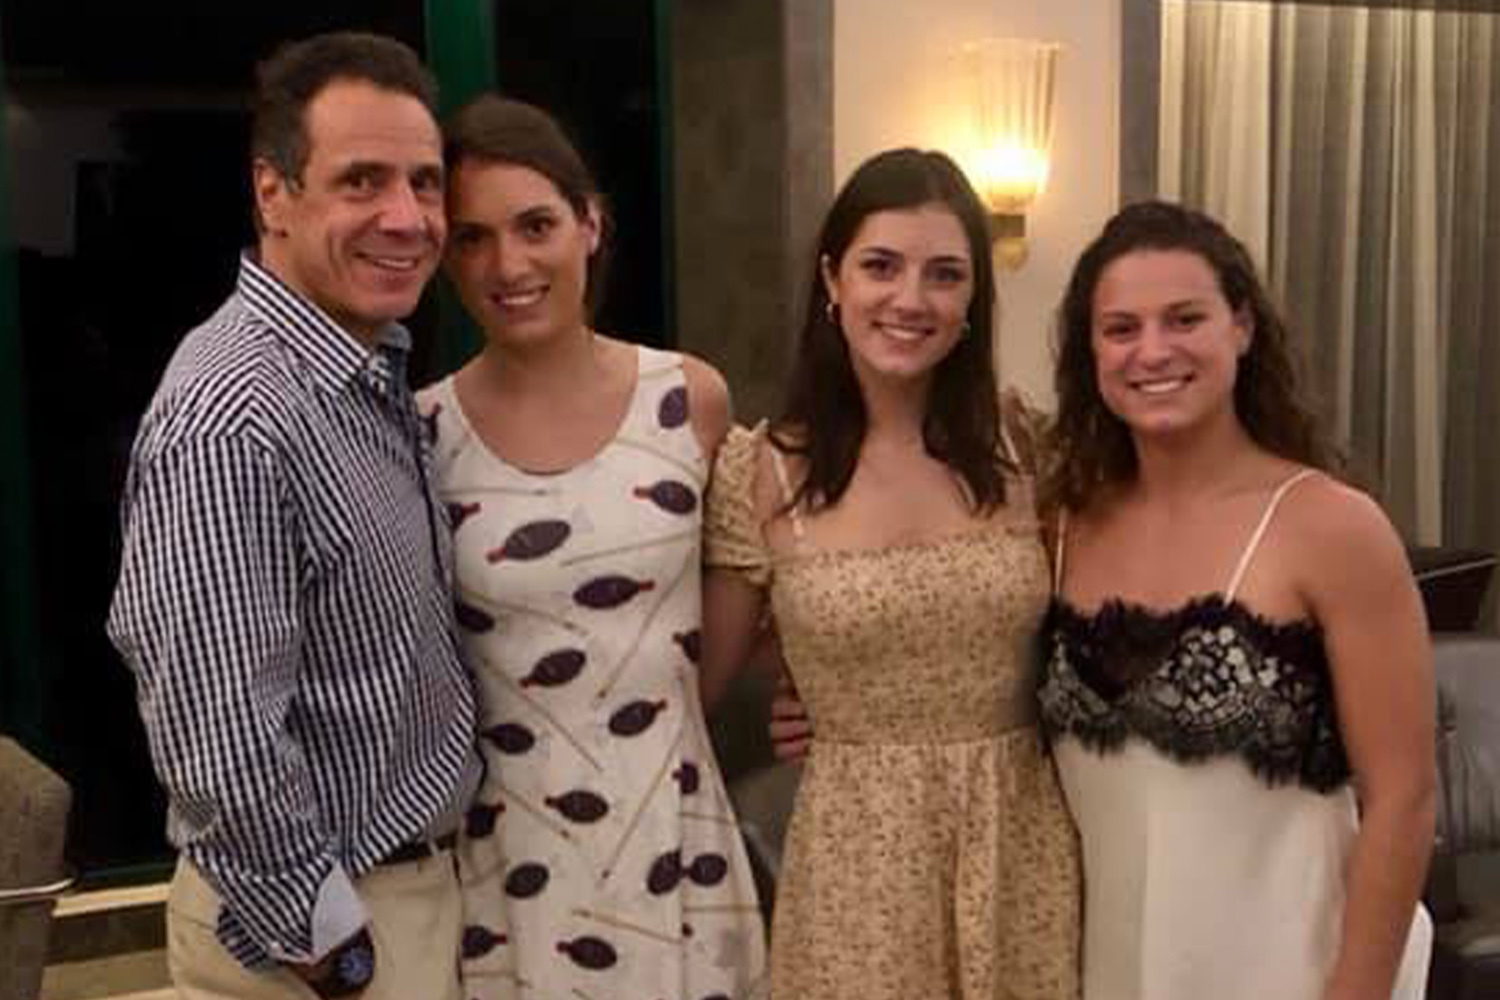 xl cuomo daughters 2 300x200